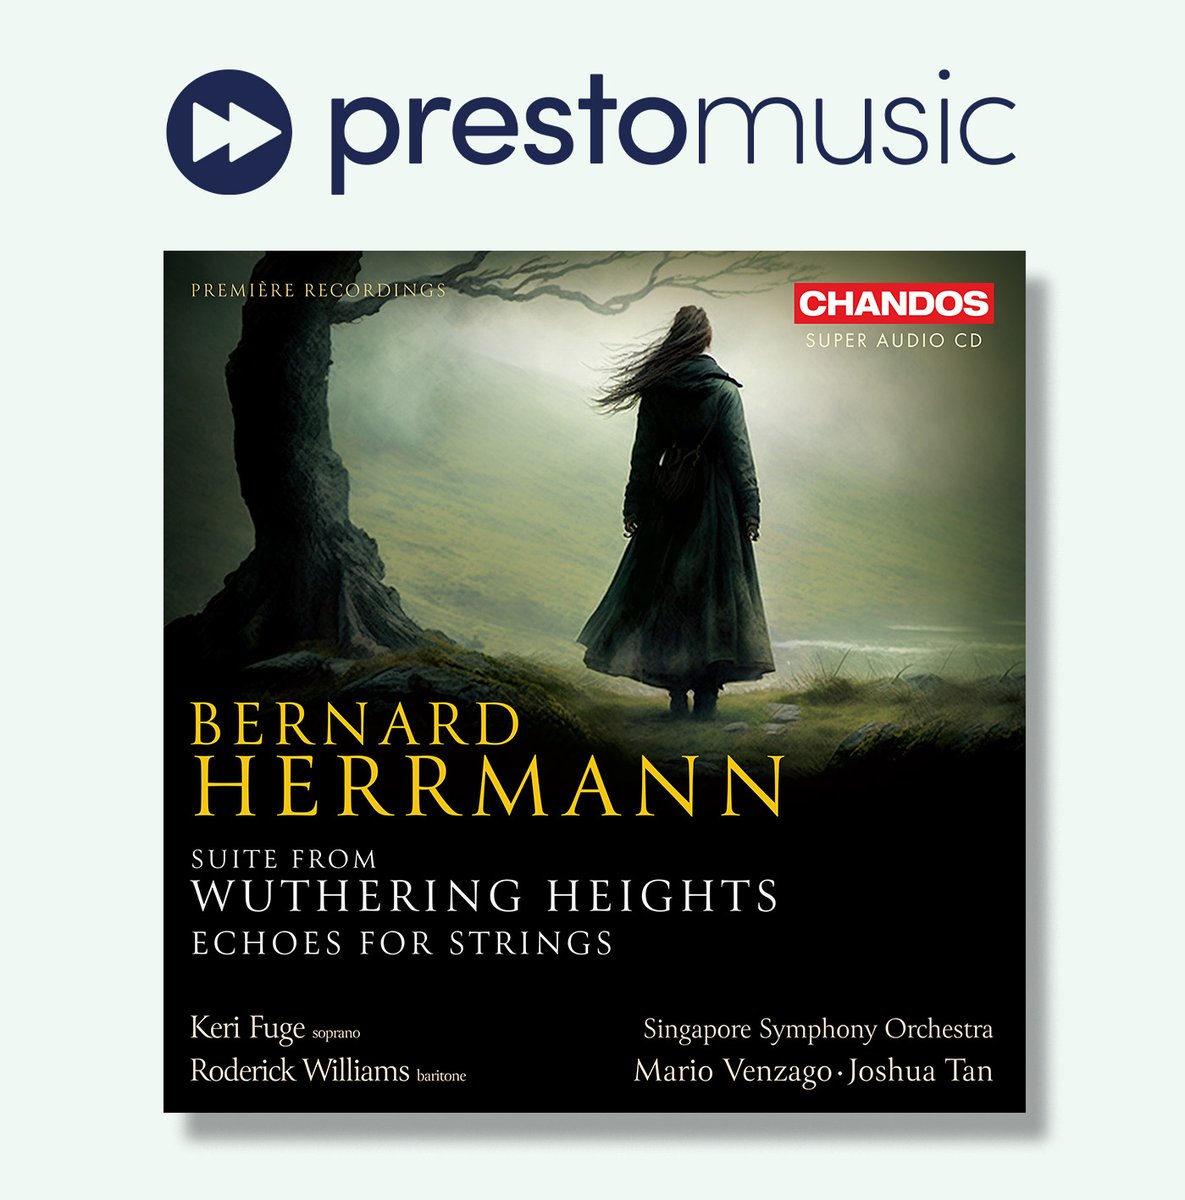 '...Fuge's expressively lyrical voice providing just the right amount of wistfulness to match the reflective melancholy of Herrmann's music...he [Williams] is every bit as sublime as expected.' 'Wuthering Heights' is @PrestoMusicCom Album of the Week!🌟 🔗tinyurl.com/4x9d7ph3?utm_c…